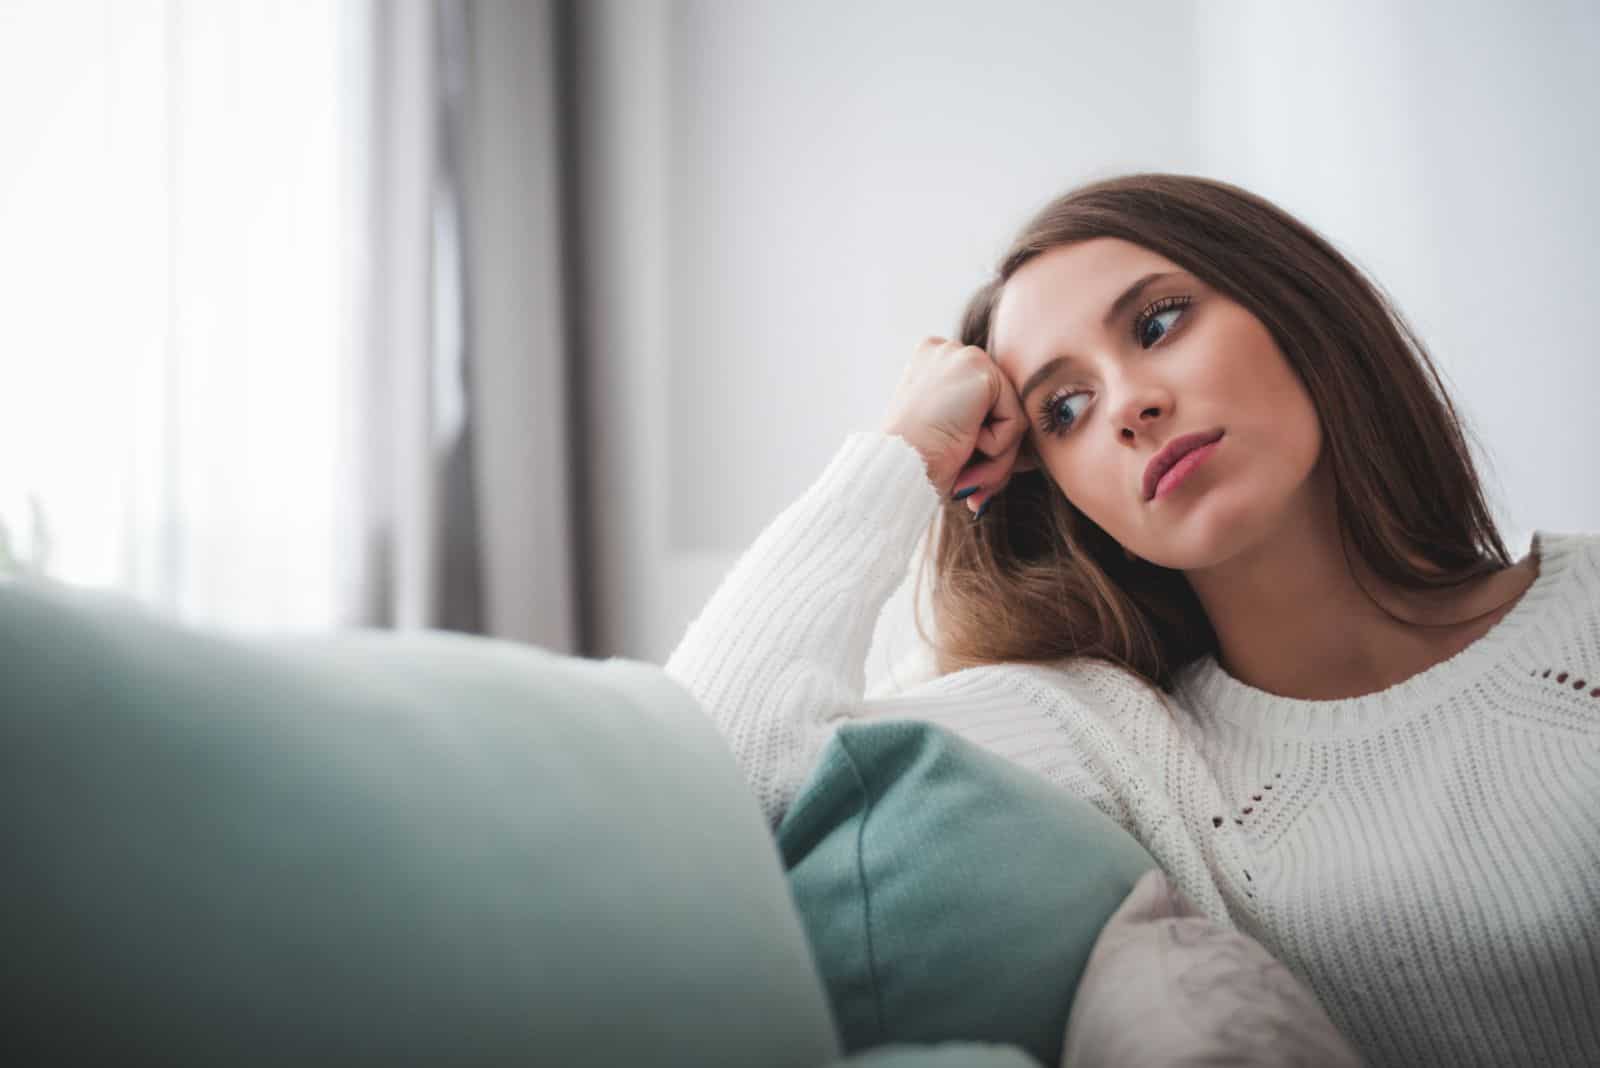 a woman with long brown hair sits on the couch in thought